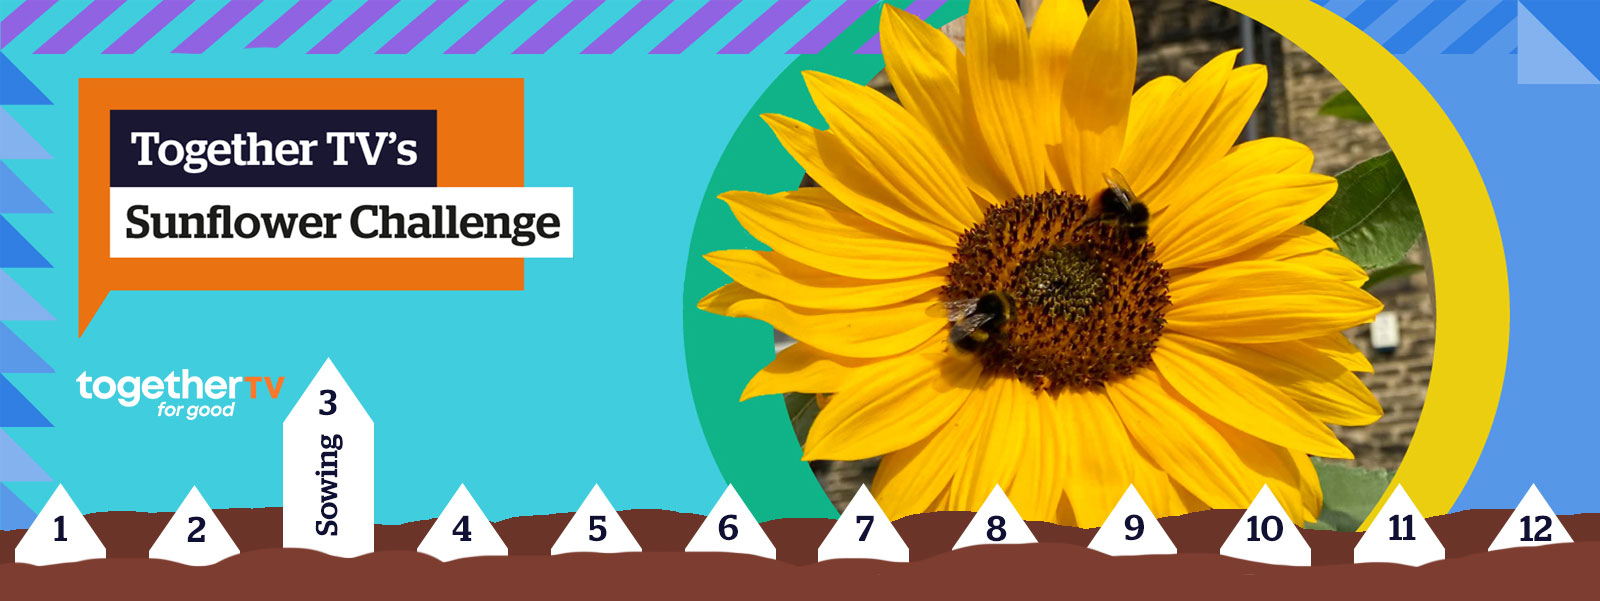 Together TV's Sunflower Challenge - week 3: sowing